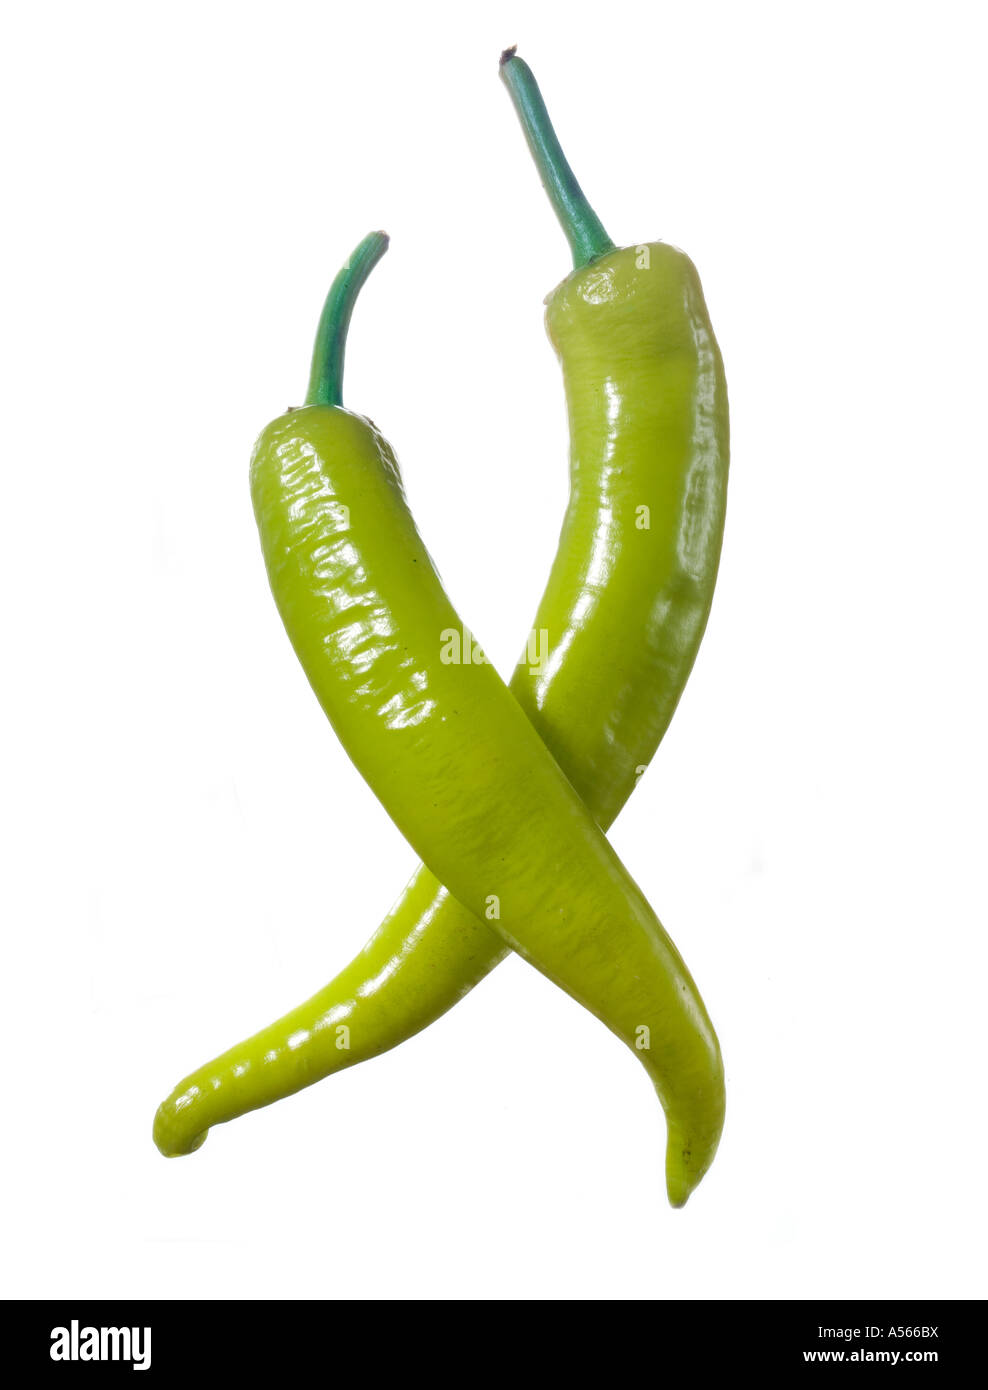 hungarian wax peppers Stock Photo